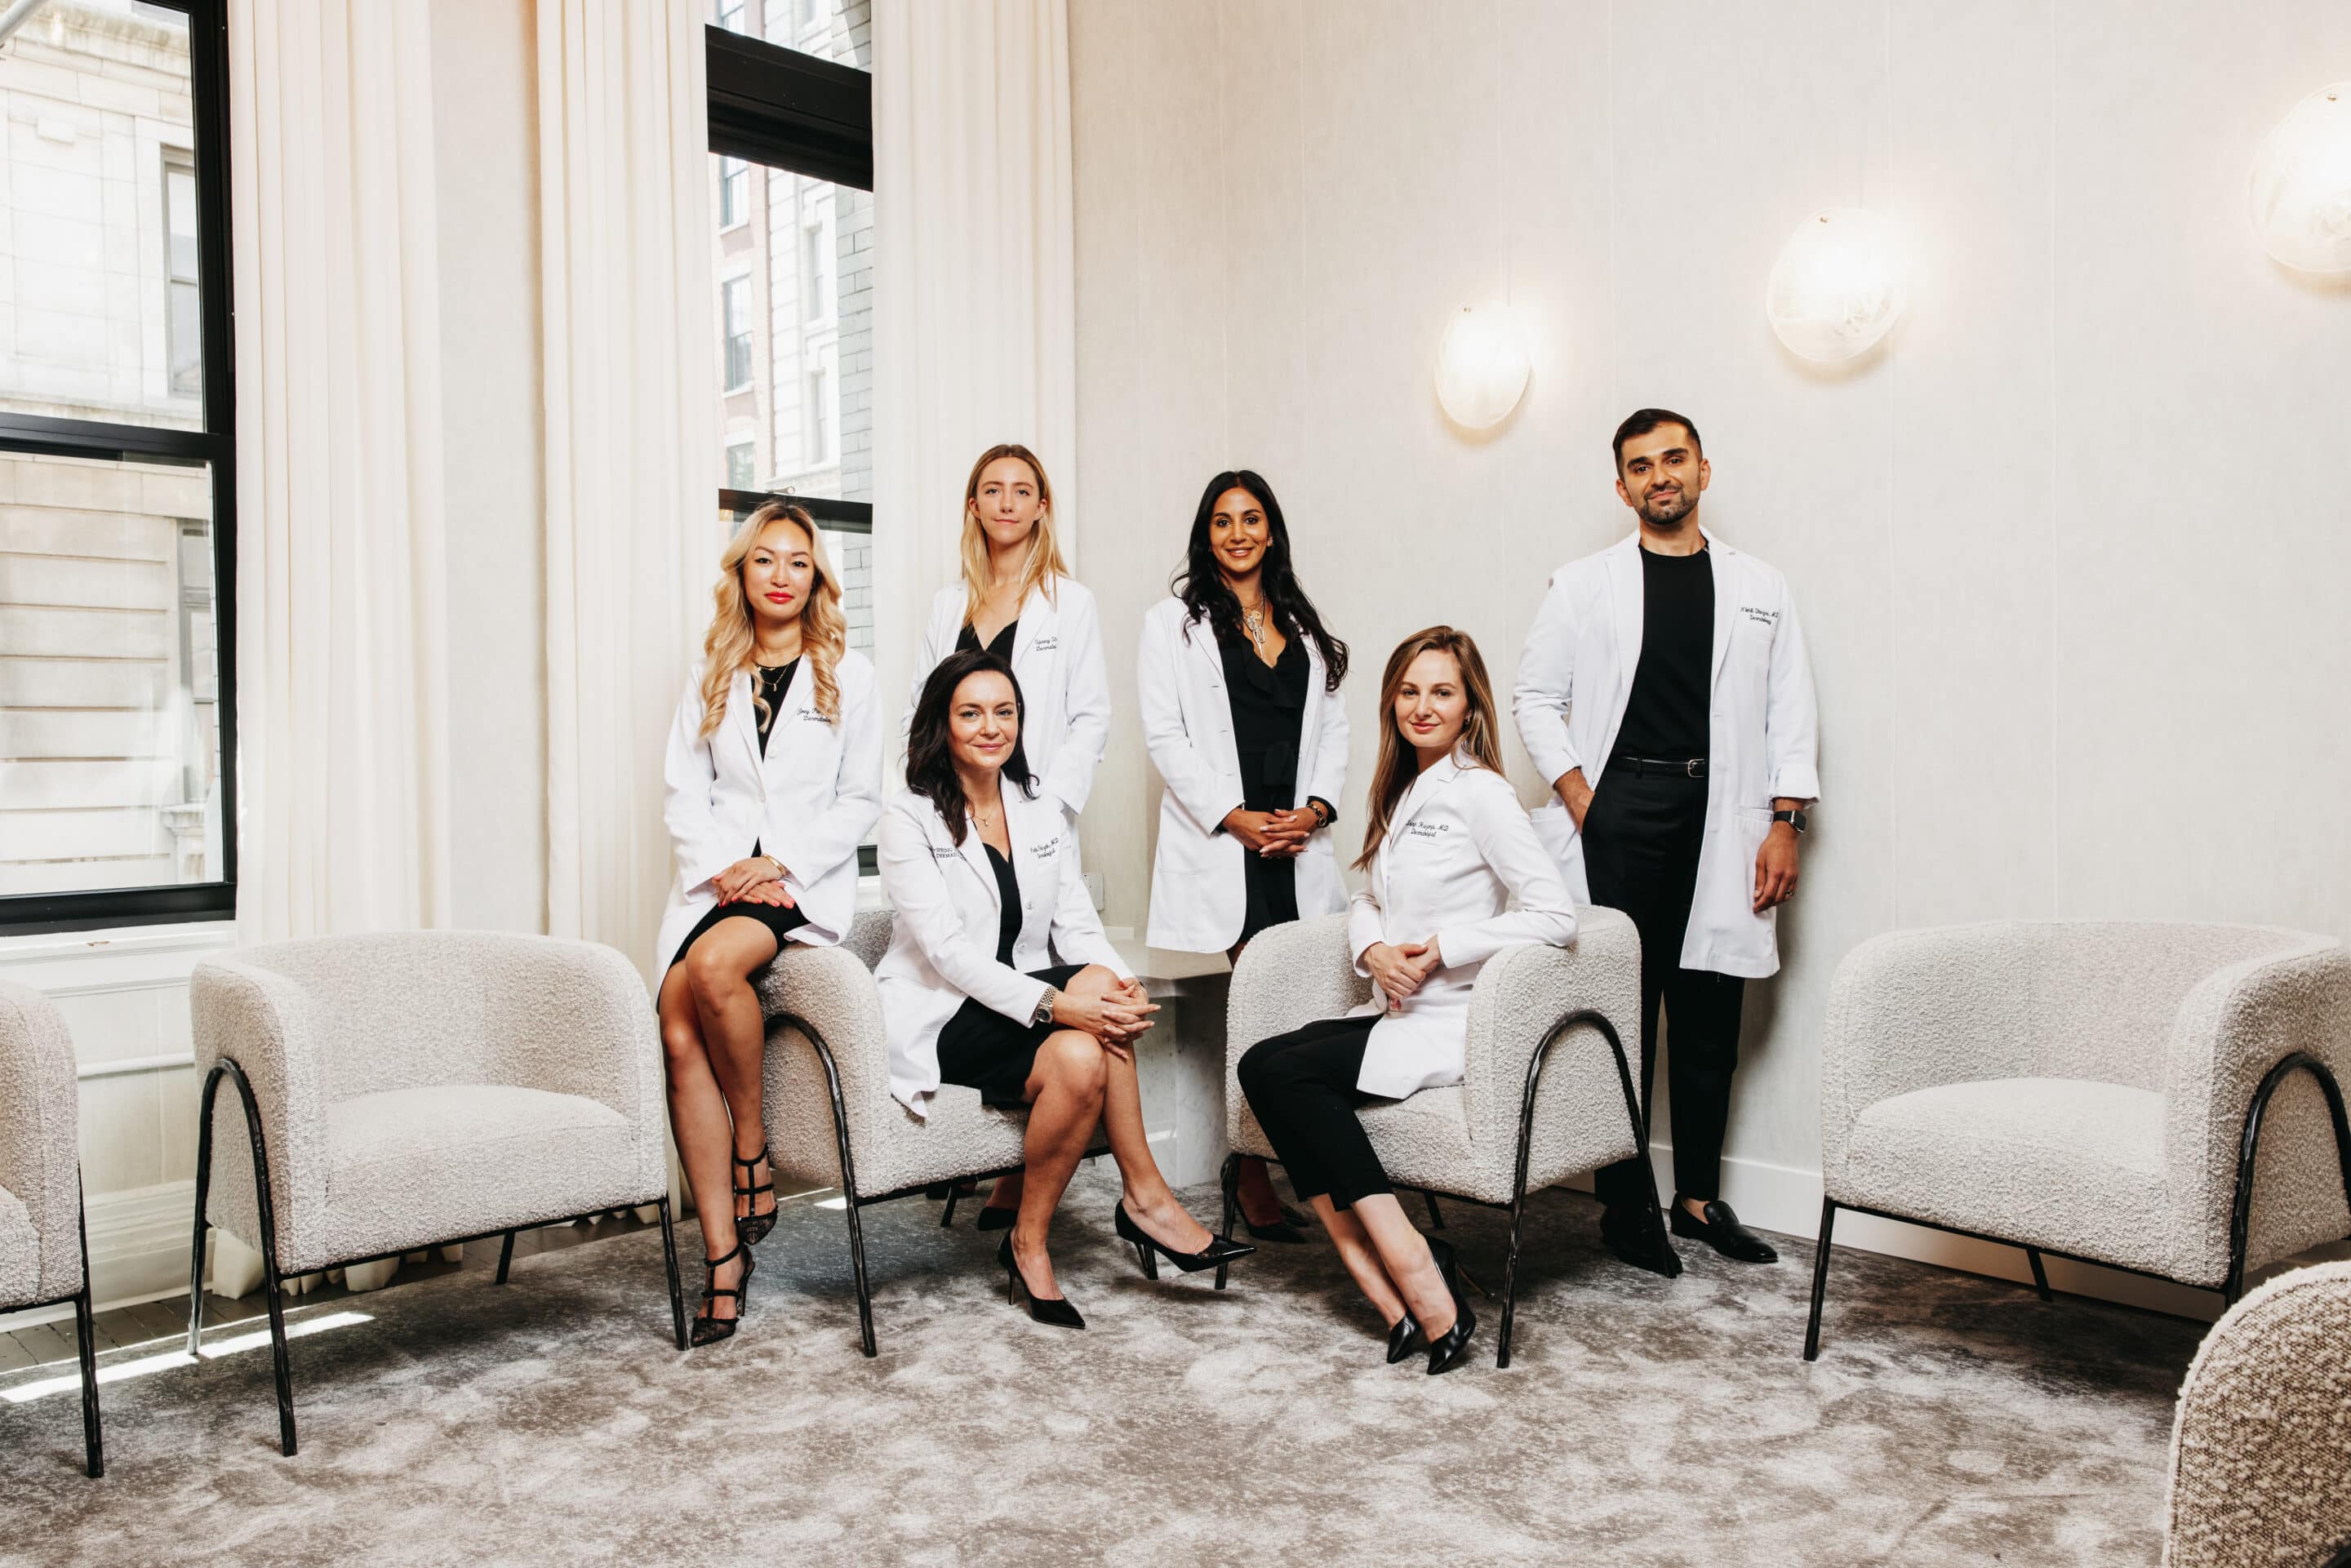 Group photo of Board Certified Dermatologists at Spring Street Dermatology, New York City, NY.